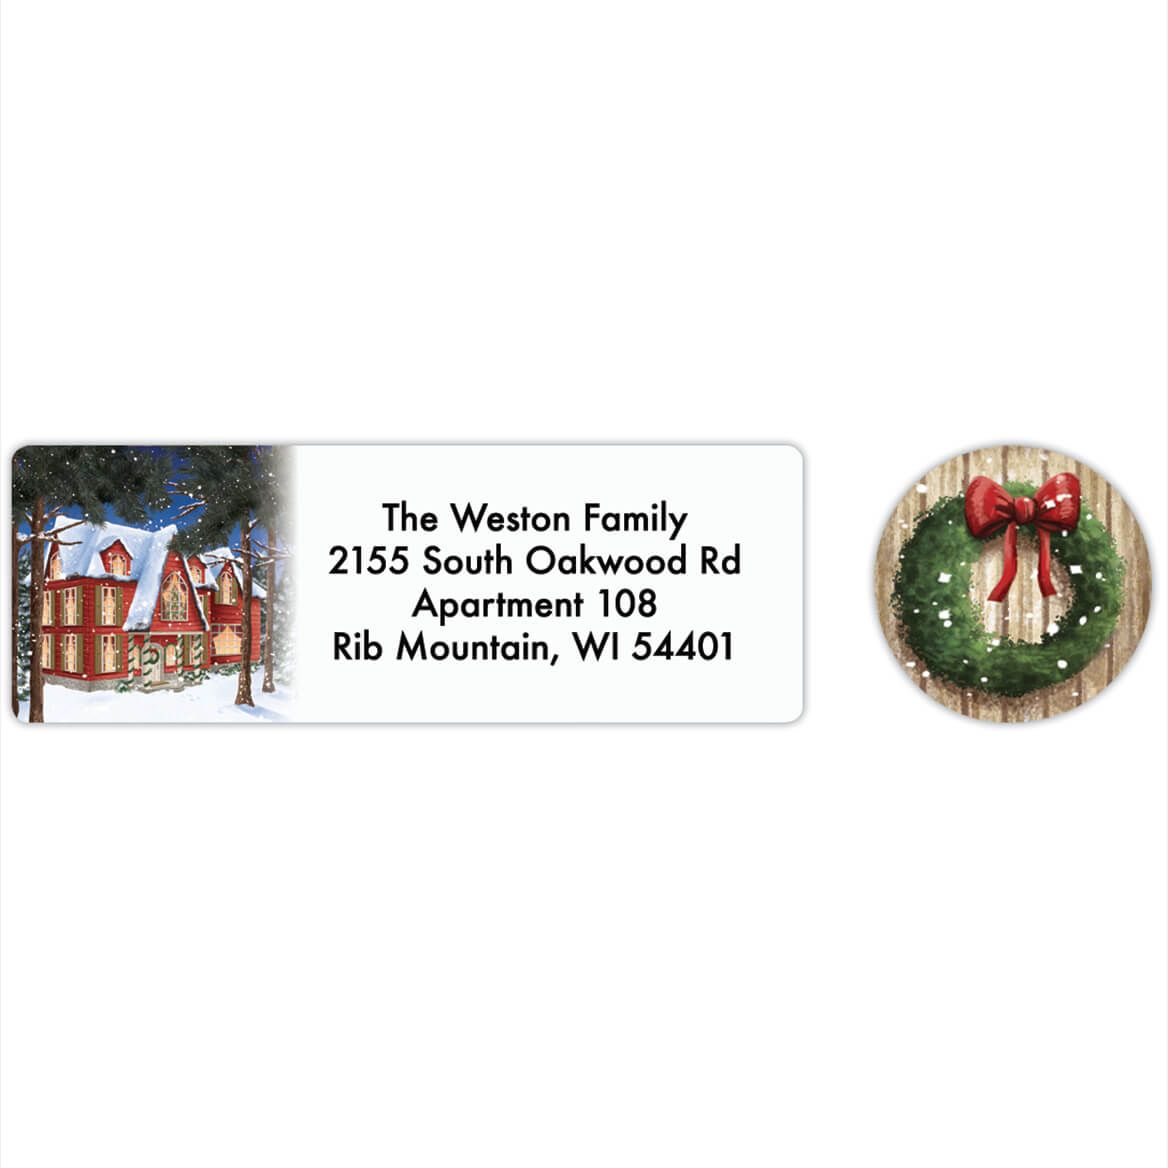 Personalized Home for the Holidays Labels & Envelope Seals 20 + '-' + 368277